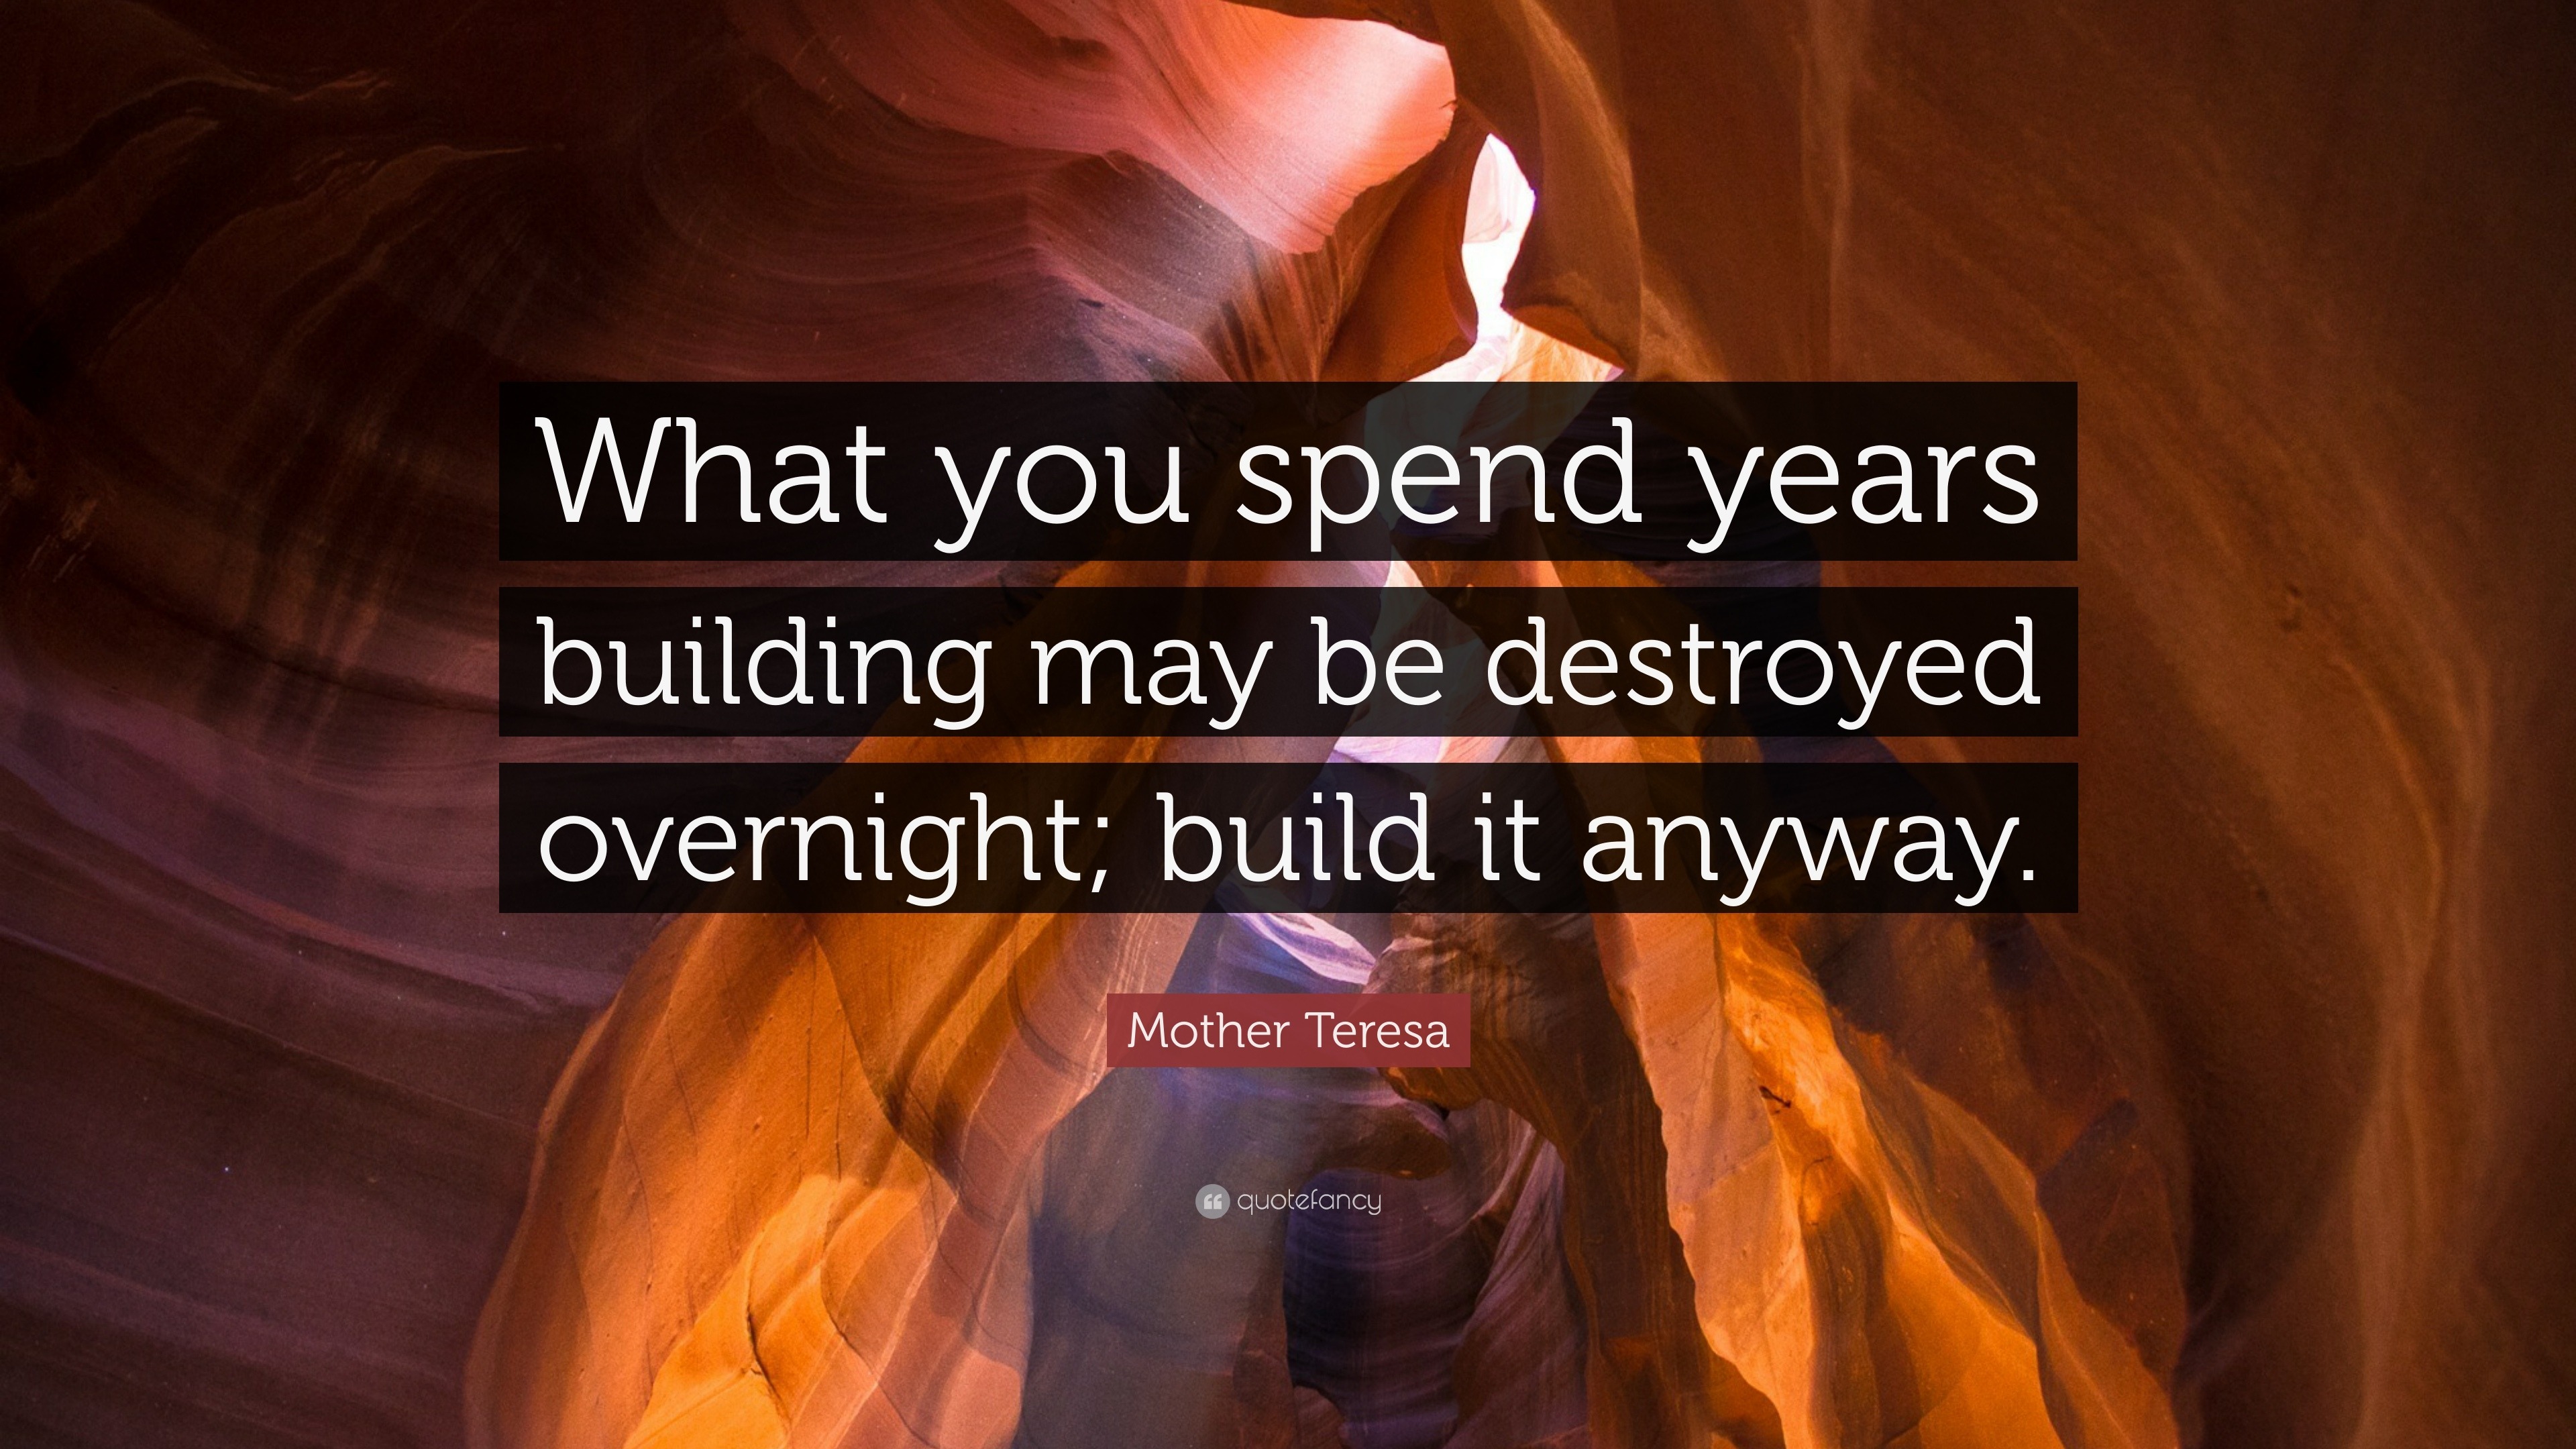 Mother Teresa Quote “What you spend years building may be destroyed overnight build